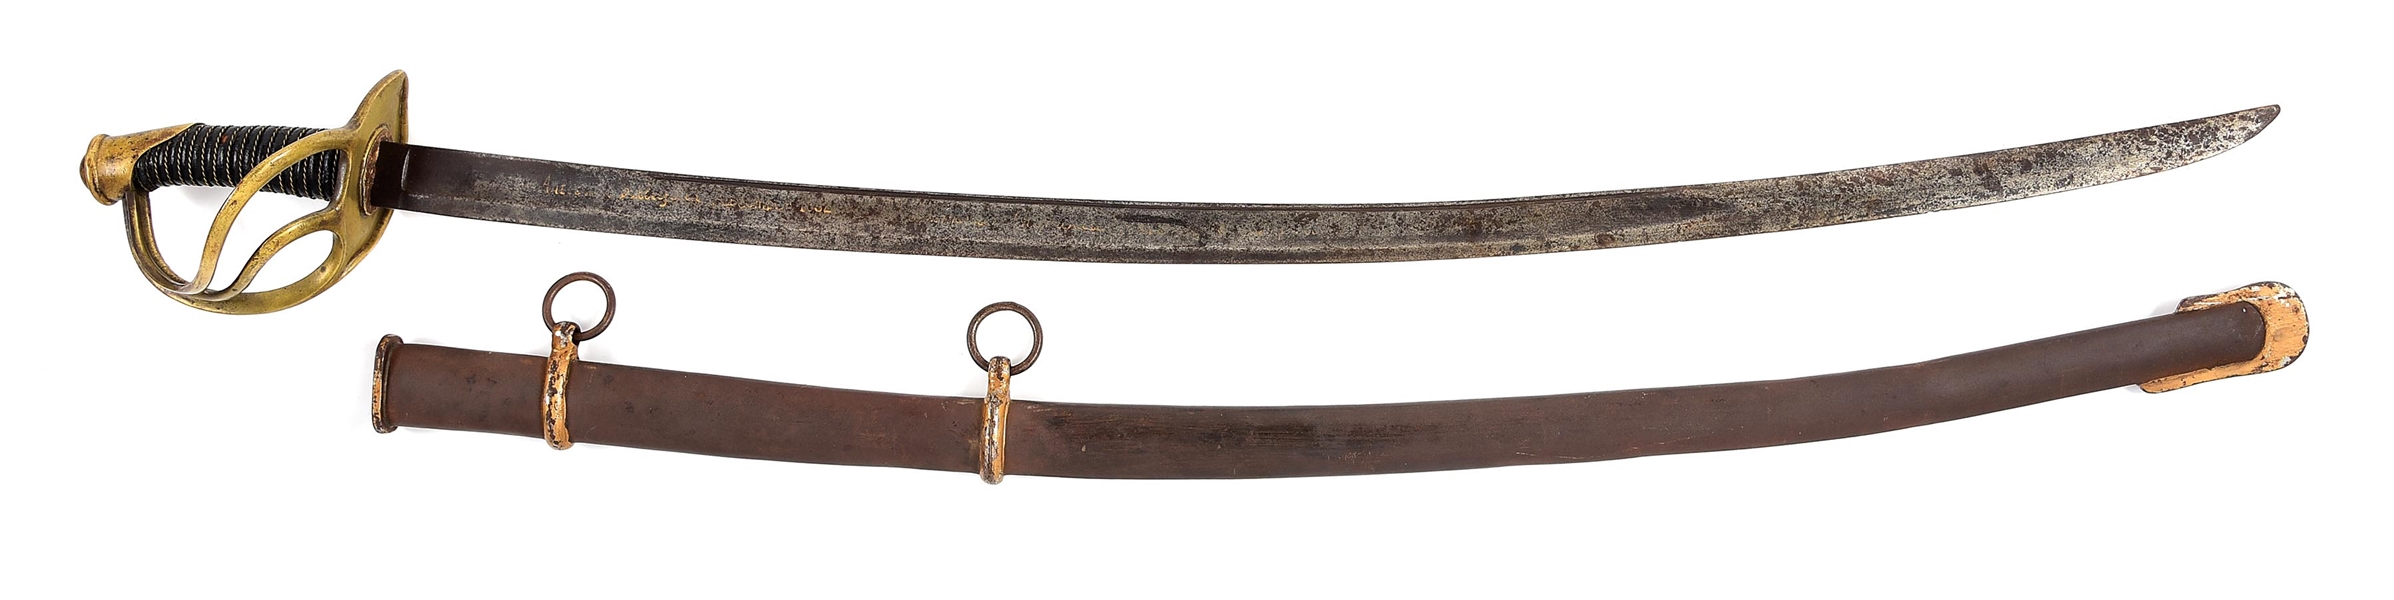 US CIVIL WAR MODEL 1840 HEAVY CAVALRY SABER RECOVERED FROM ANTIETAM BATTLEFIELD BY JOSEPH H. TRUNDLE AND SOLD BY BATTLEFIELD GUIDE O.T. REILLY.